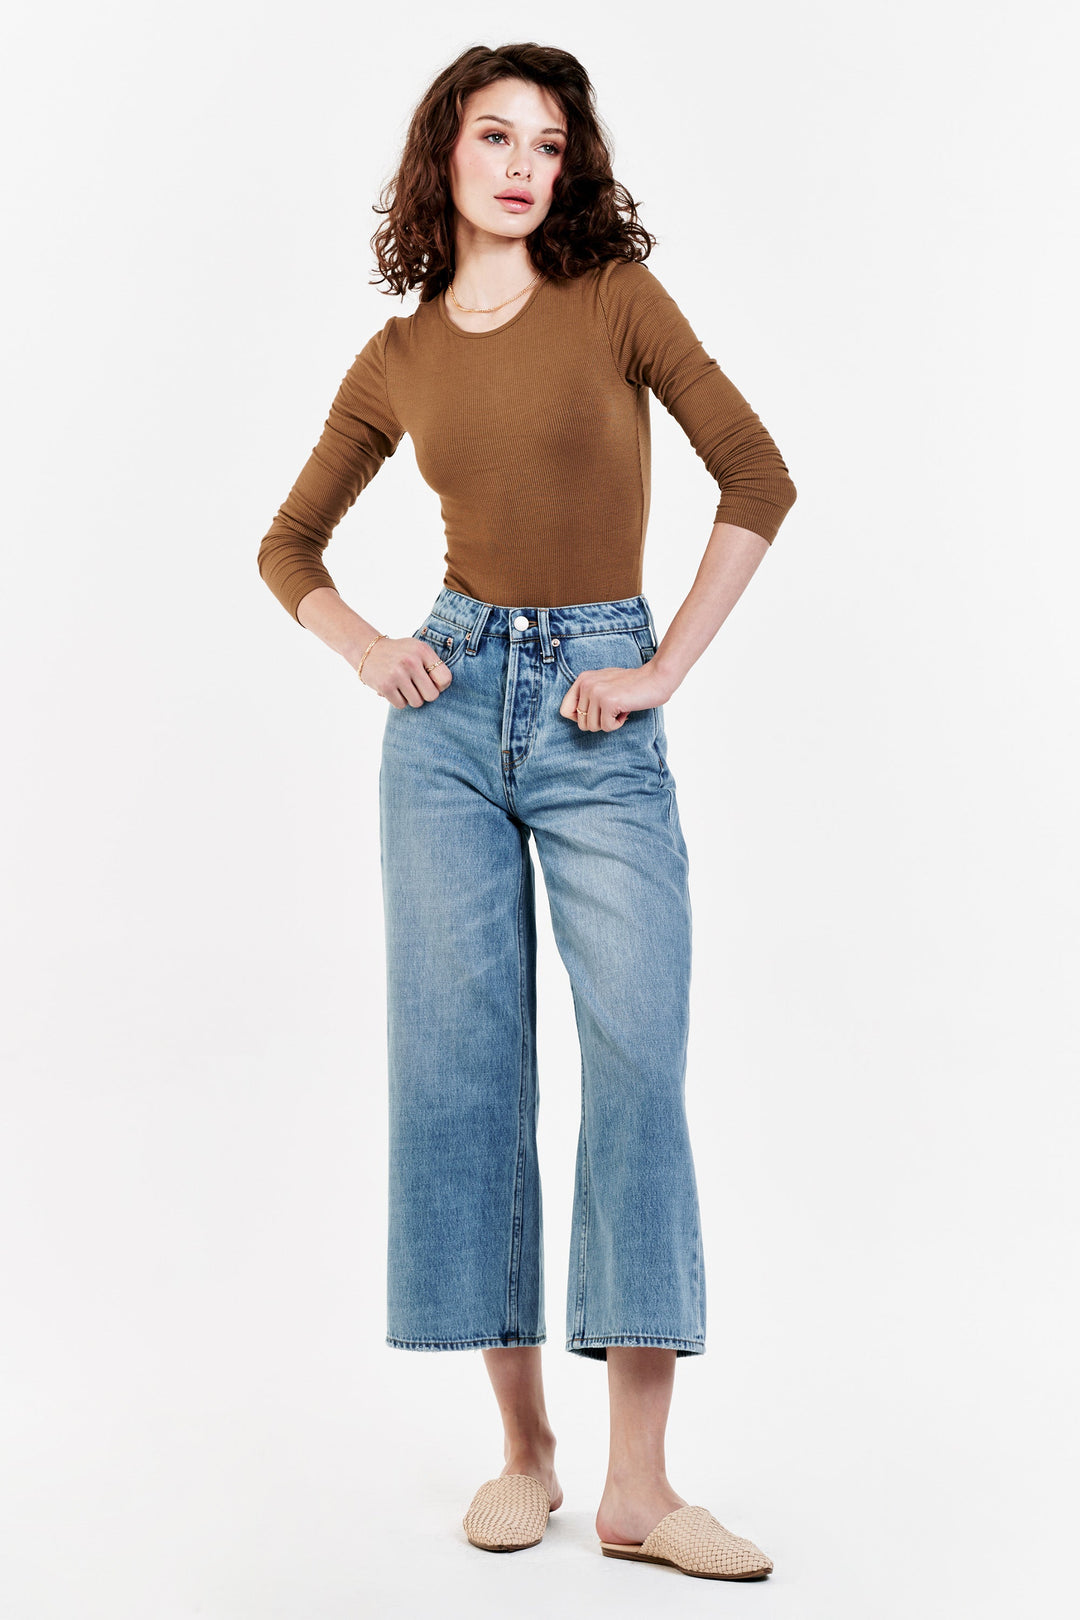 image of a female model wearing a SAMANTHA SUPER HIGH RISE CROPPED WIDE LEG JEANS KEARNEY JEANS